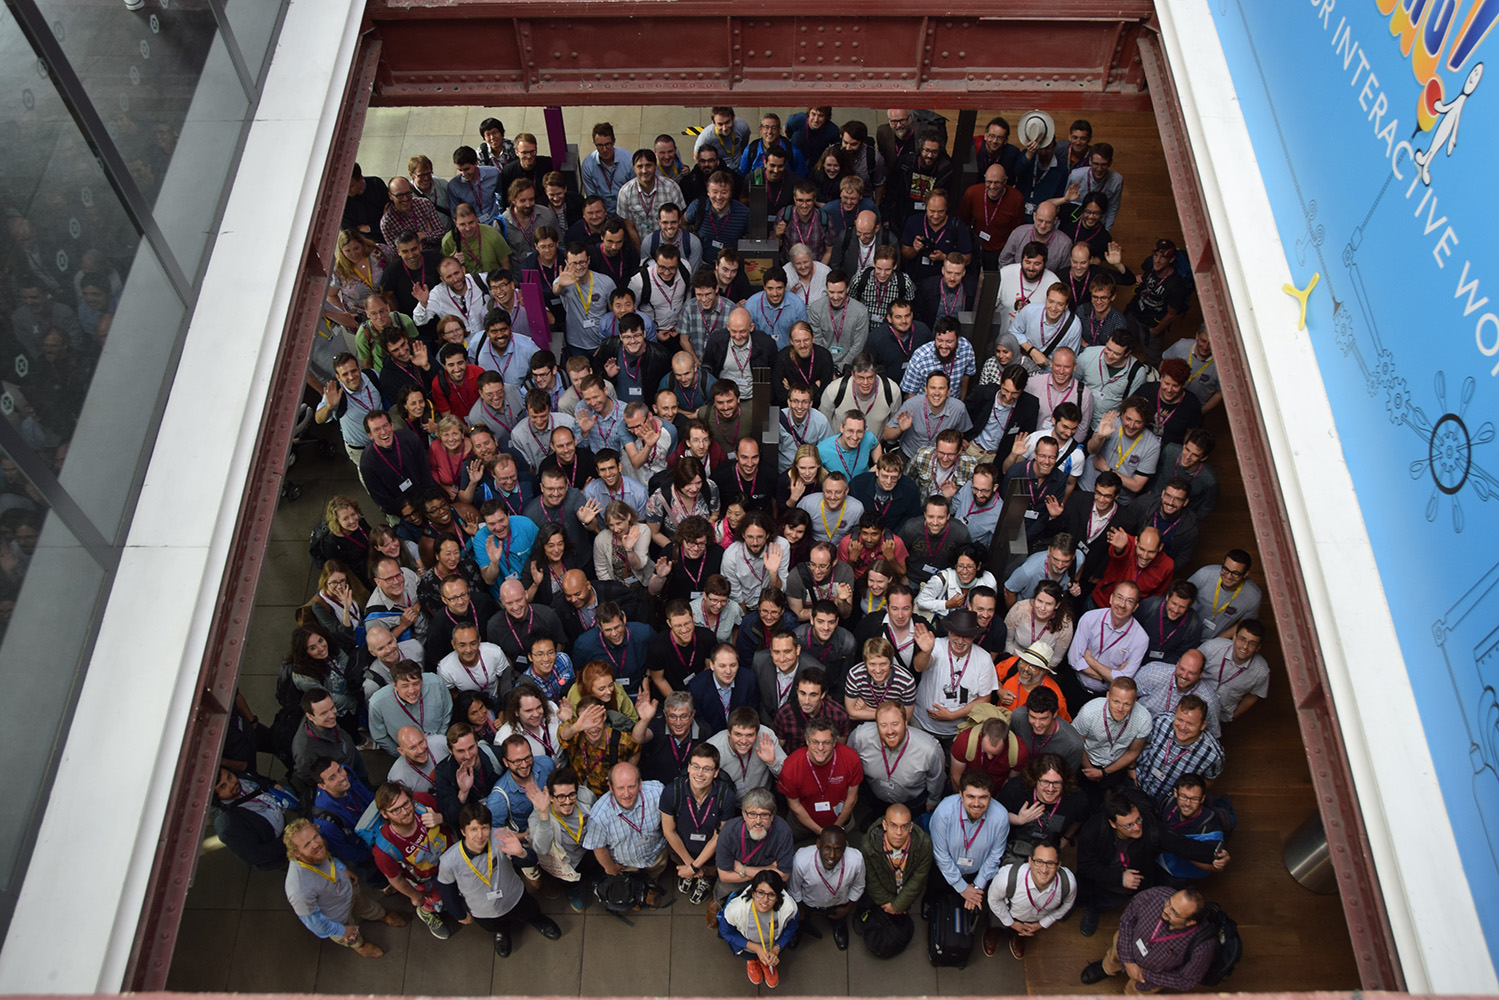 Group photo of the conference at RSE conference in 2016